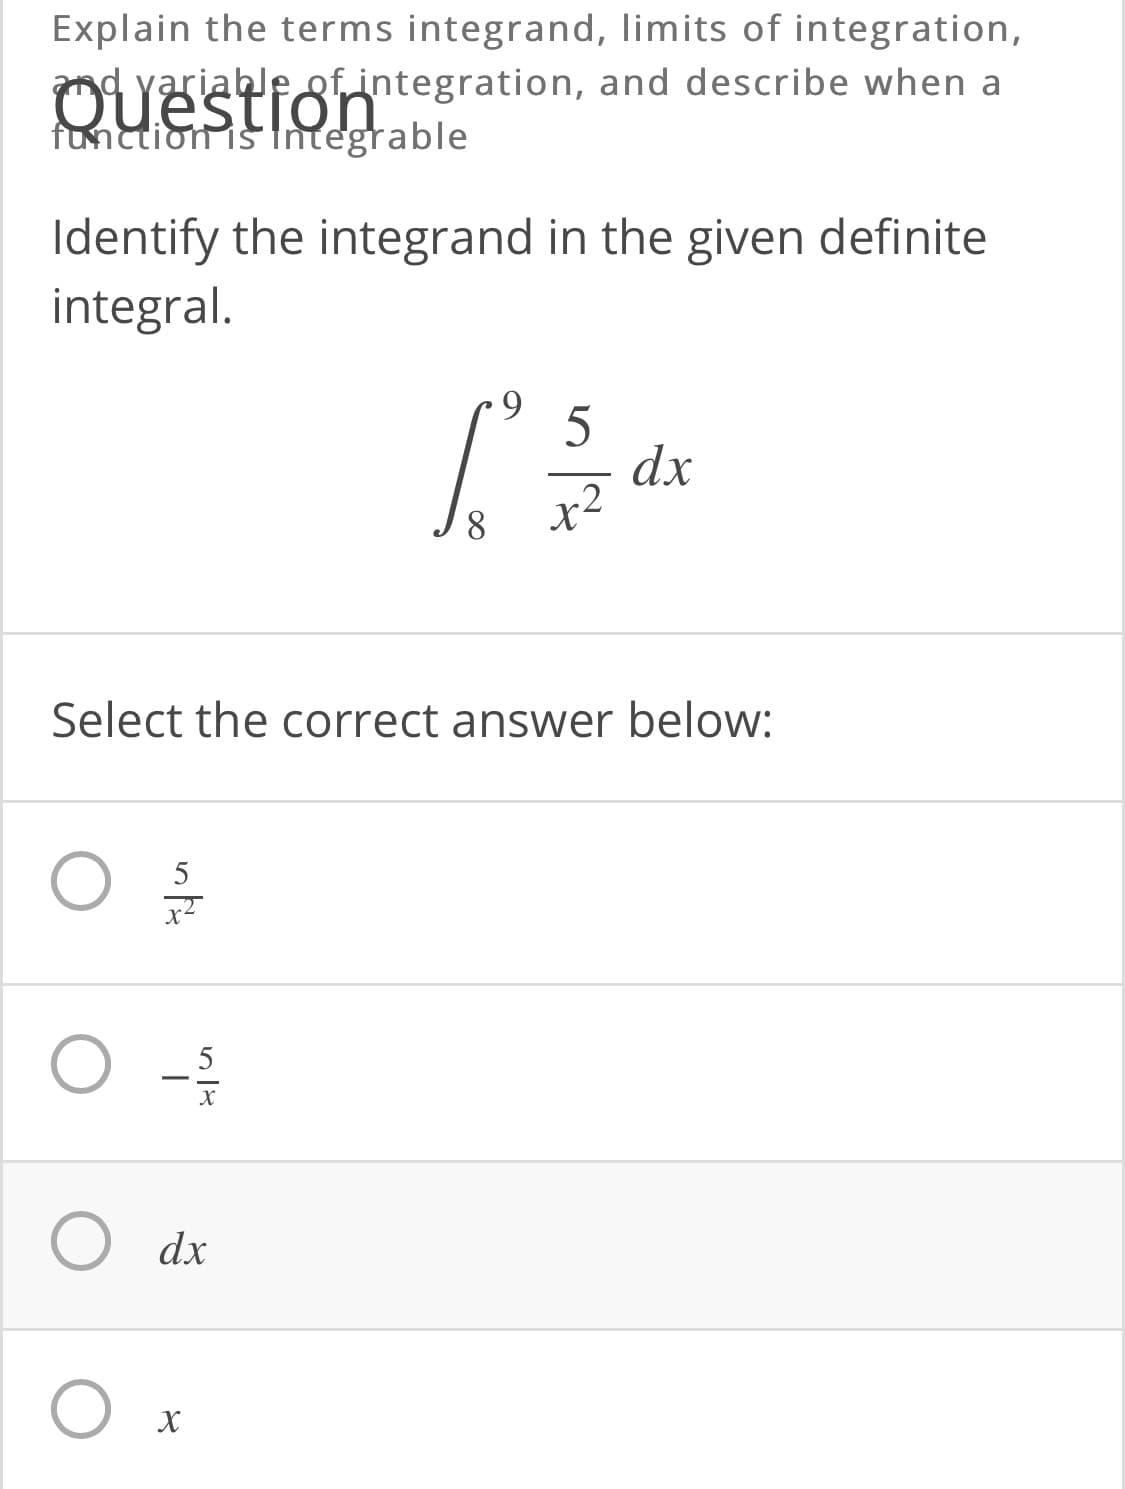 Explain the terms integrand, limits of integration,
nd yariable gfintegration, and describe when a
Question
function is tntegrable
Identify the integrand in the given definite
integral.
9.
5
dx
x2
Select the correct answer below:
5
х
dx
х
